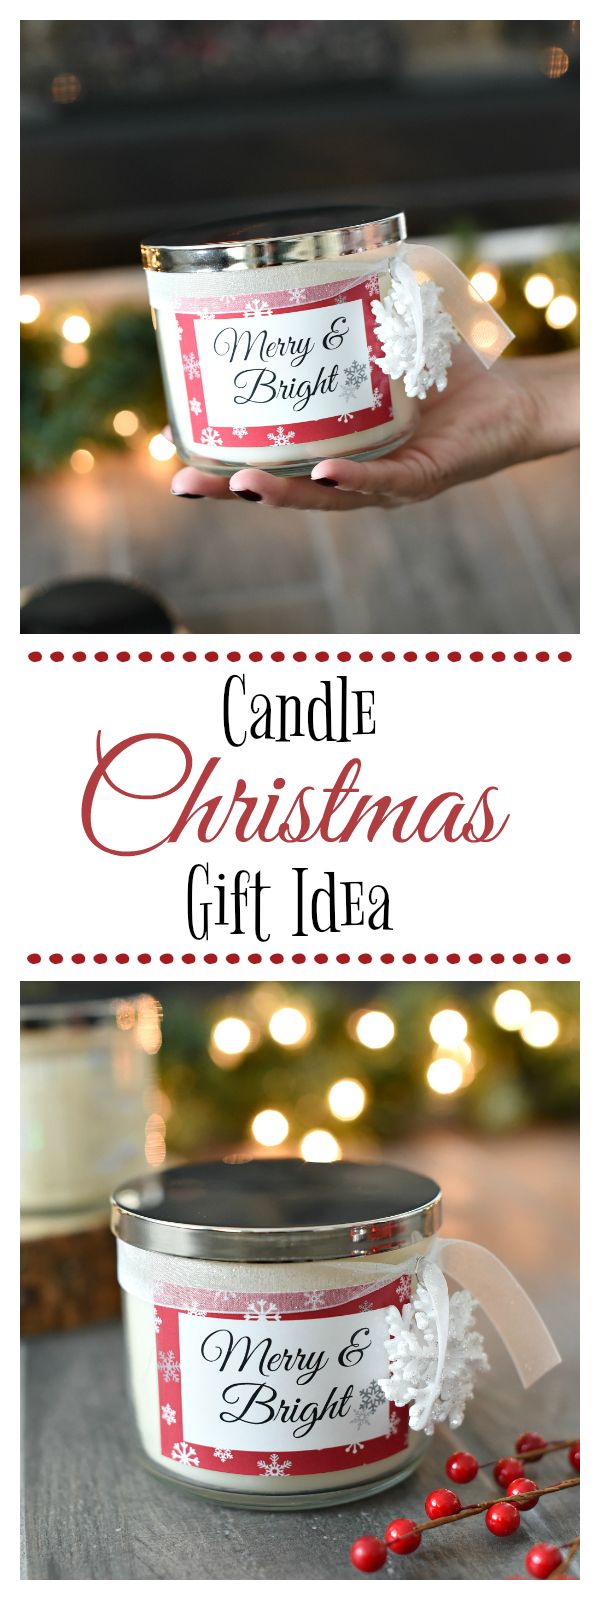 DIY Christmas candle gift idea! If you are looking for the perfect gift idea thi...